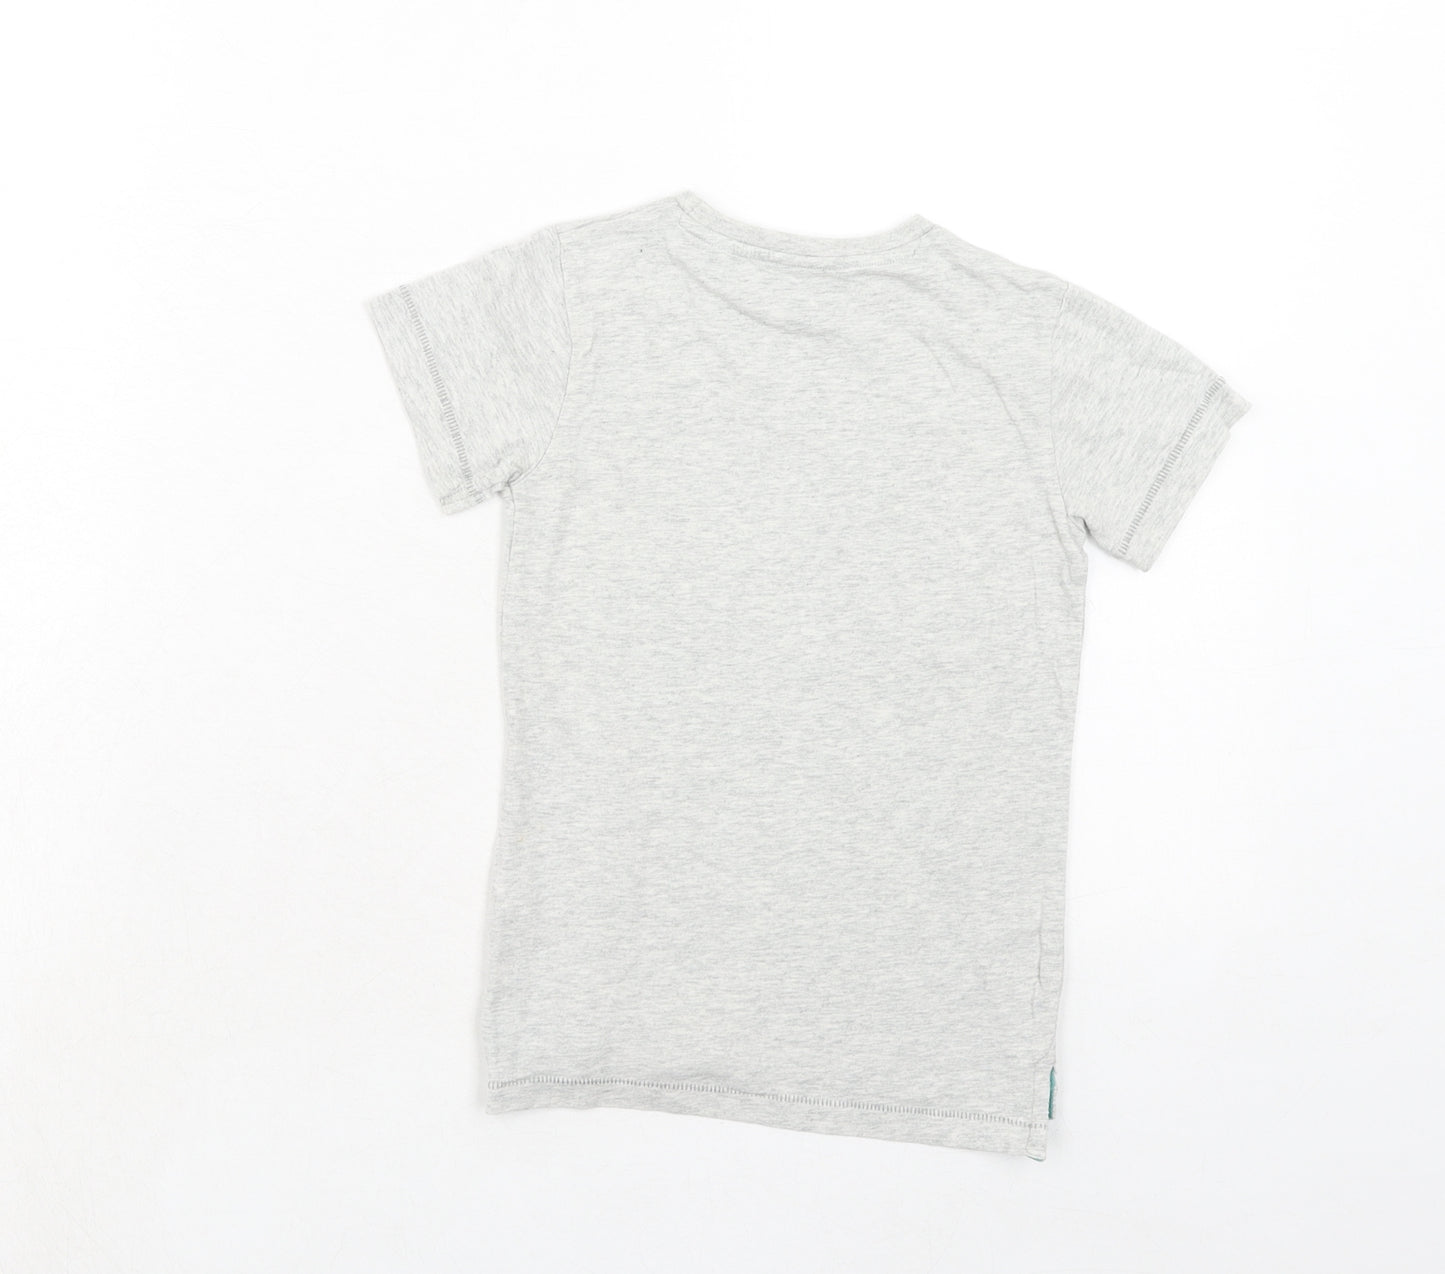 NEXT Boys Grey Cotton Basic T-Shirt Size 3-4 Years Round Neck Pullover - DUDE